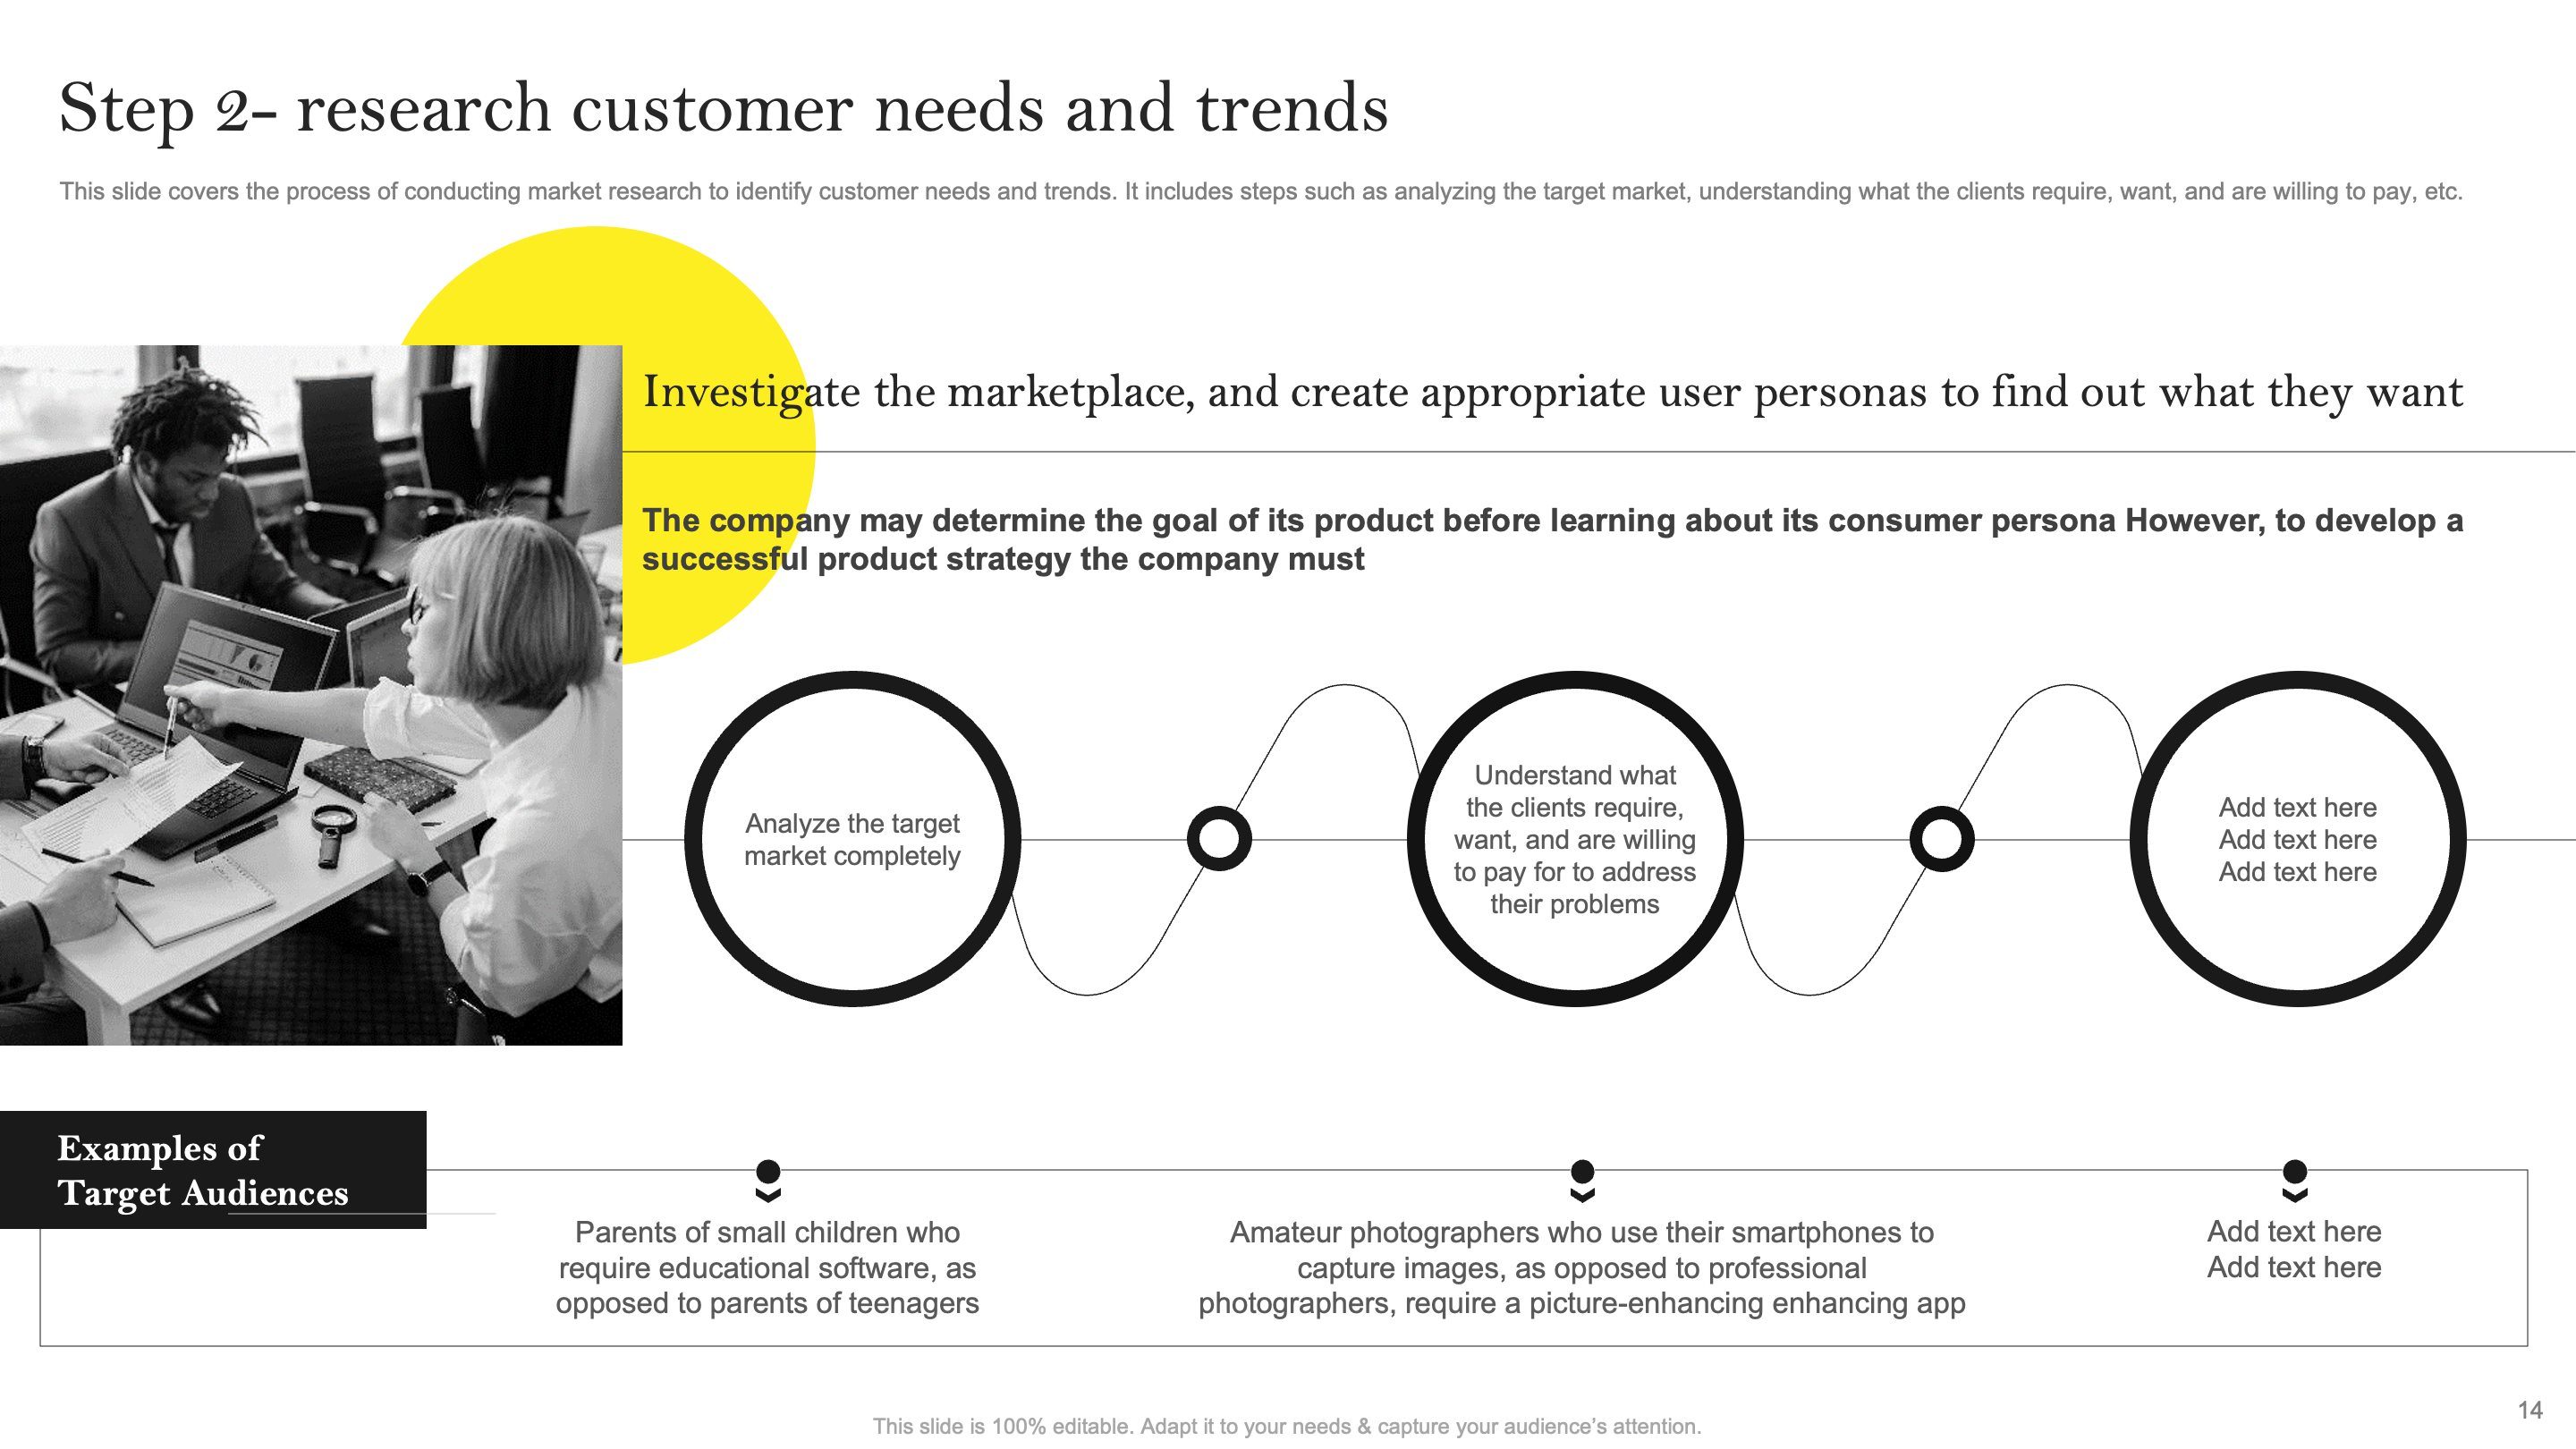 Researching Customer Needs and Trends